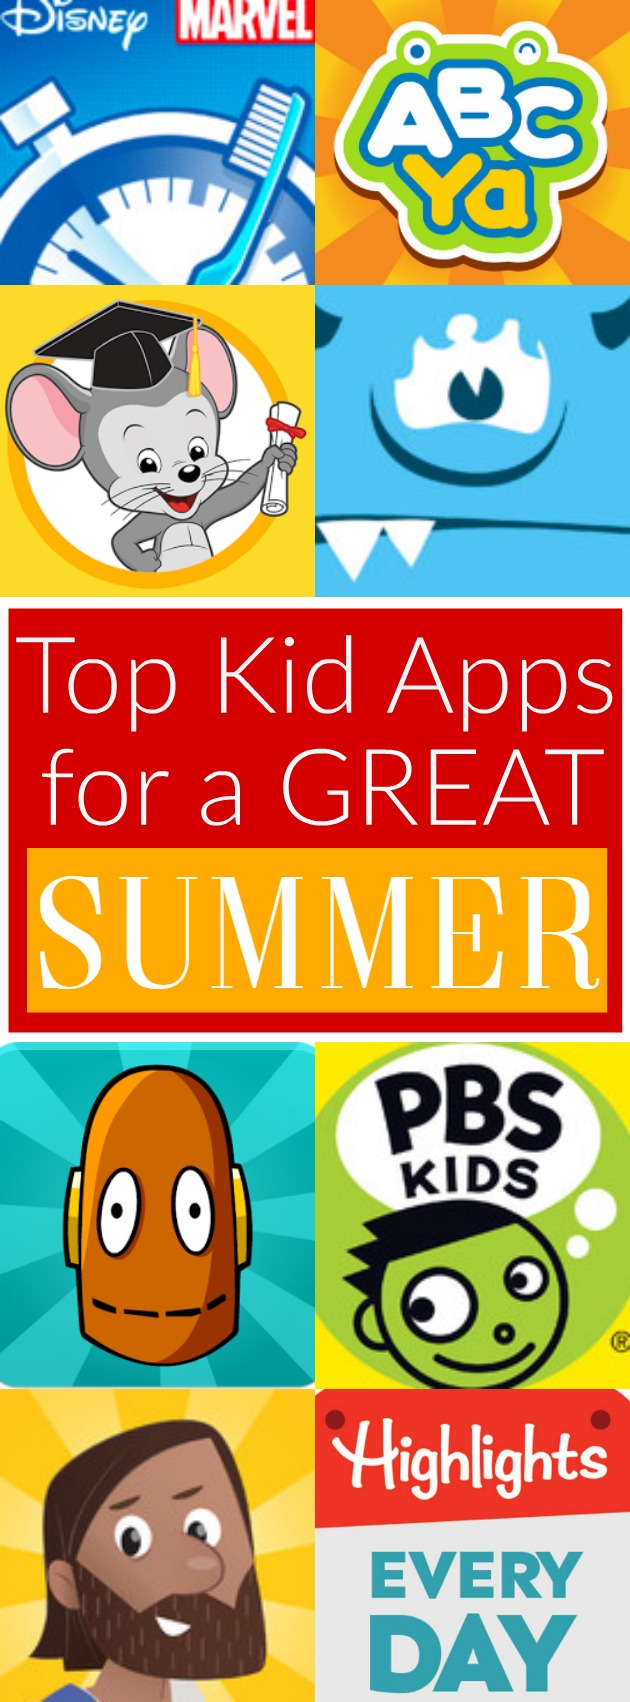 Top Kid Apps for a Great Summer